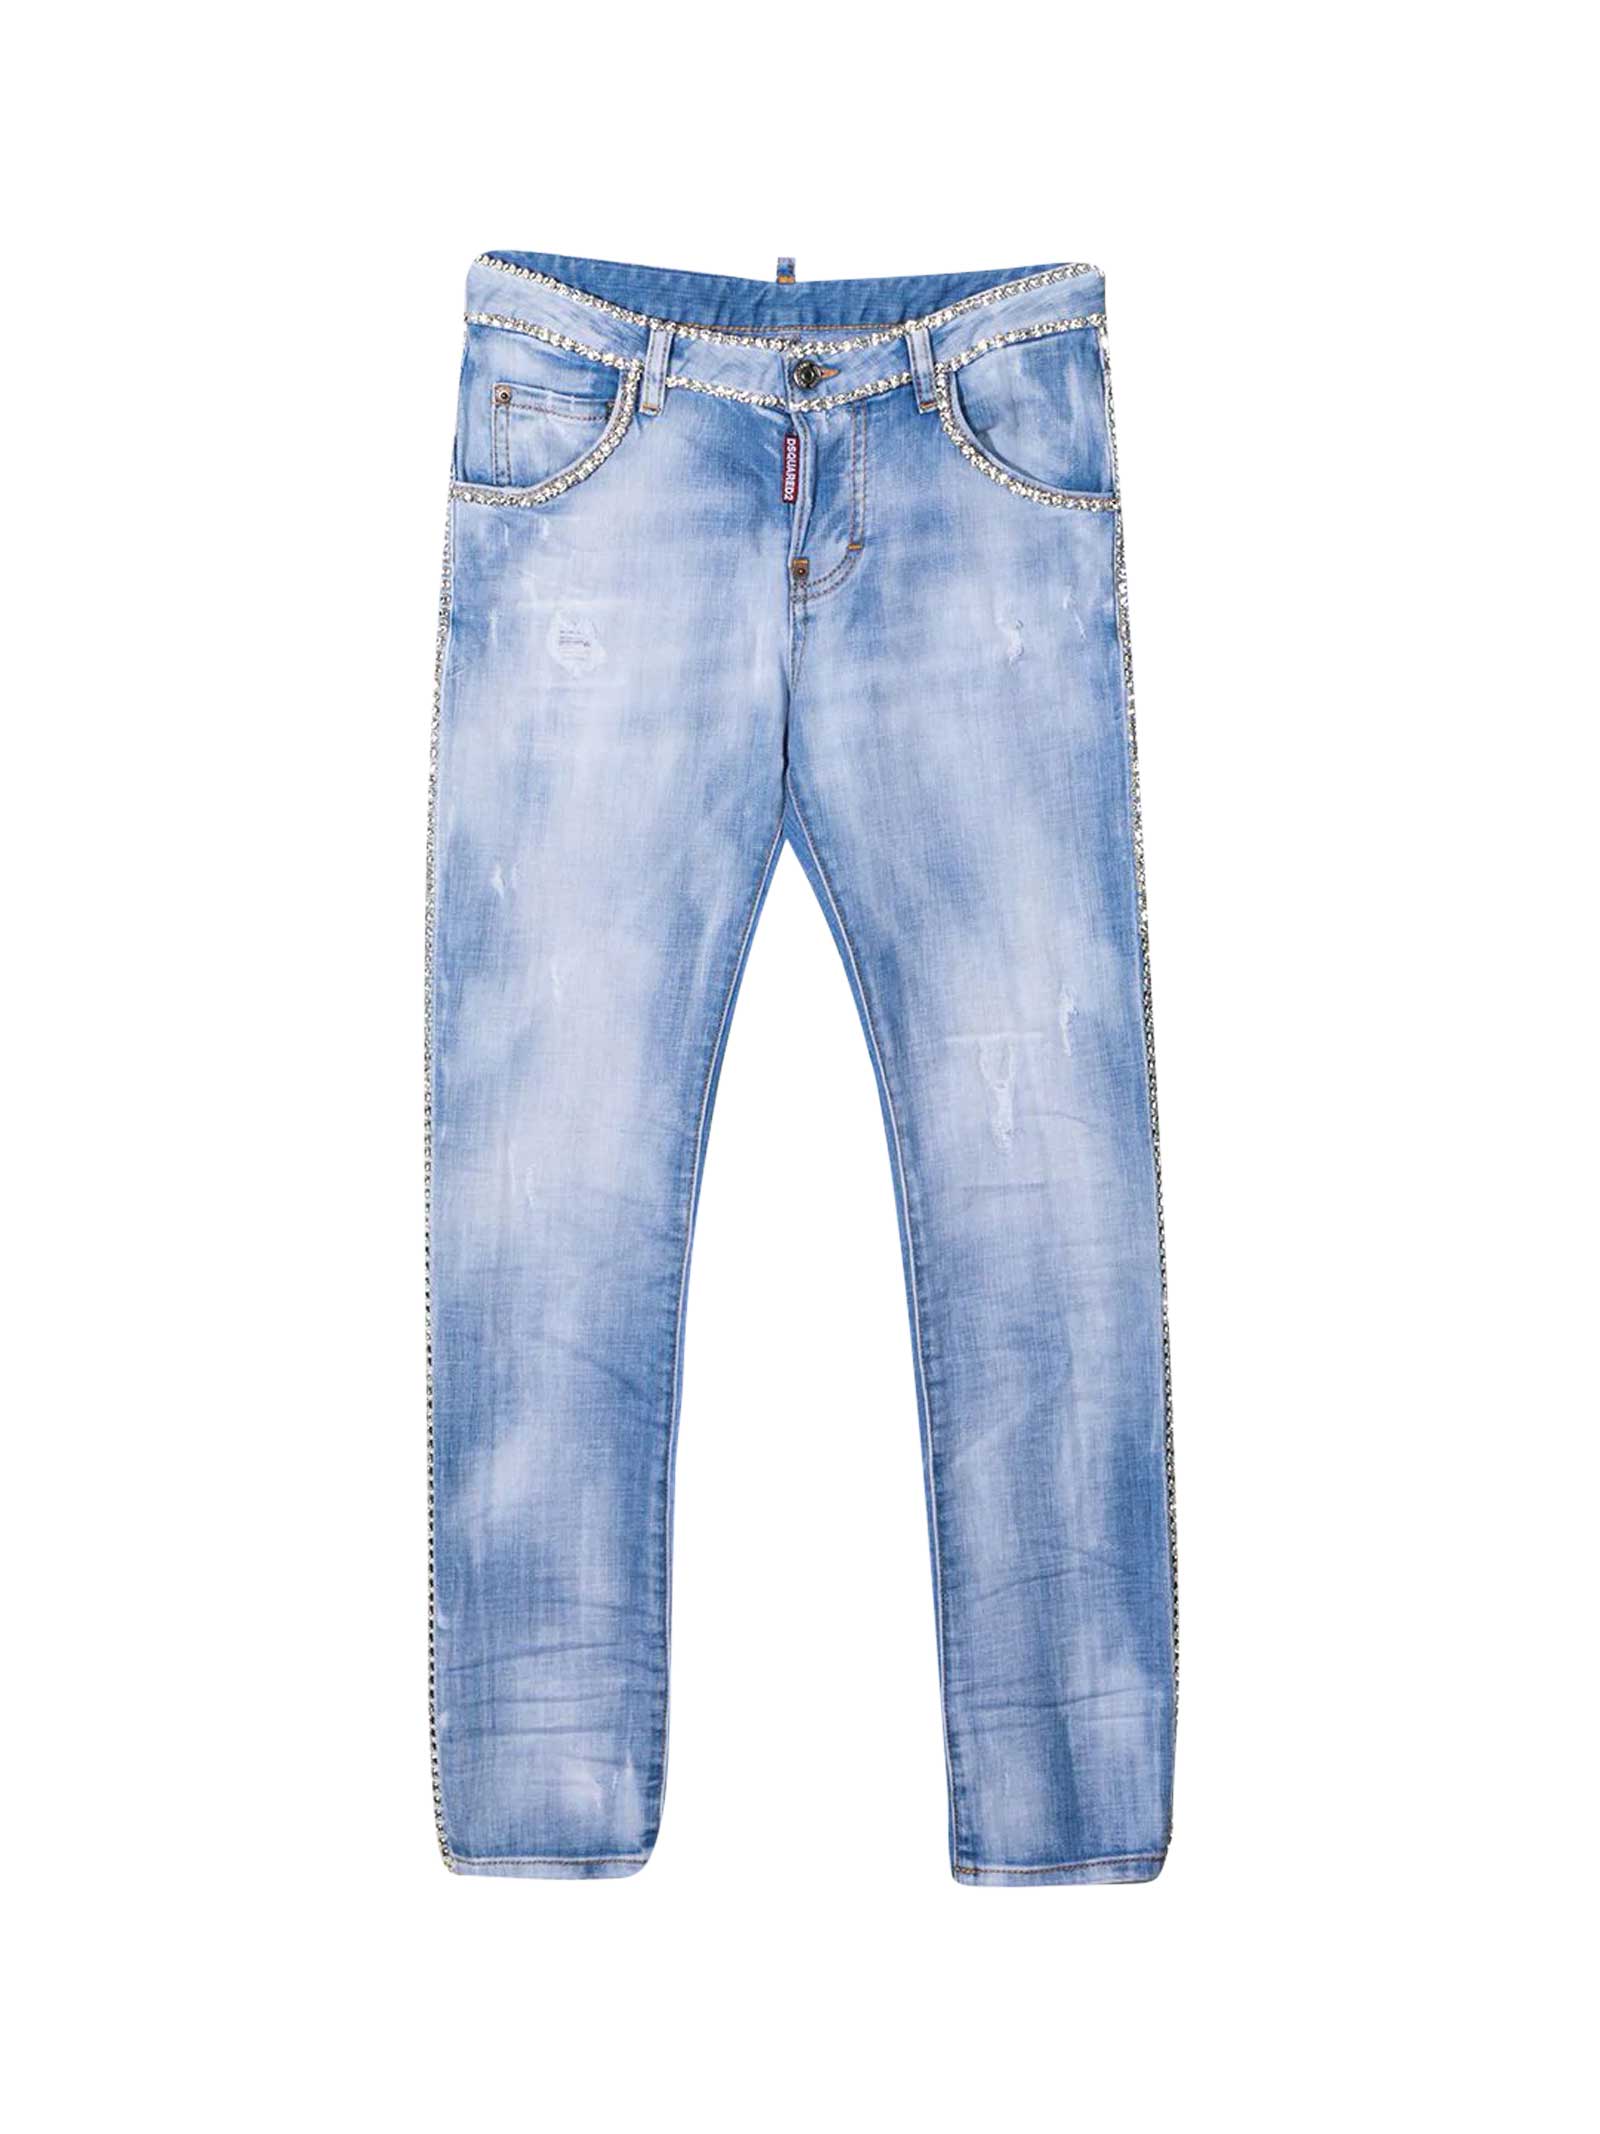 DSQUARED2 BLUE JEANS TEEN,DQ0239D004V DQ01T